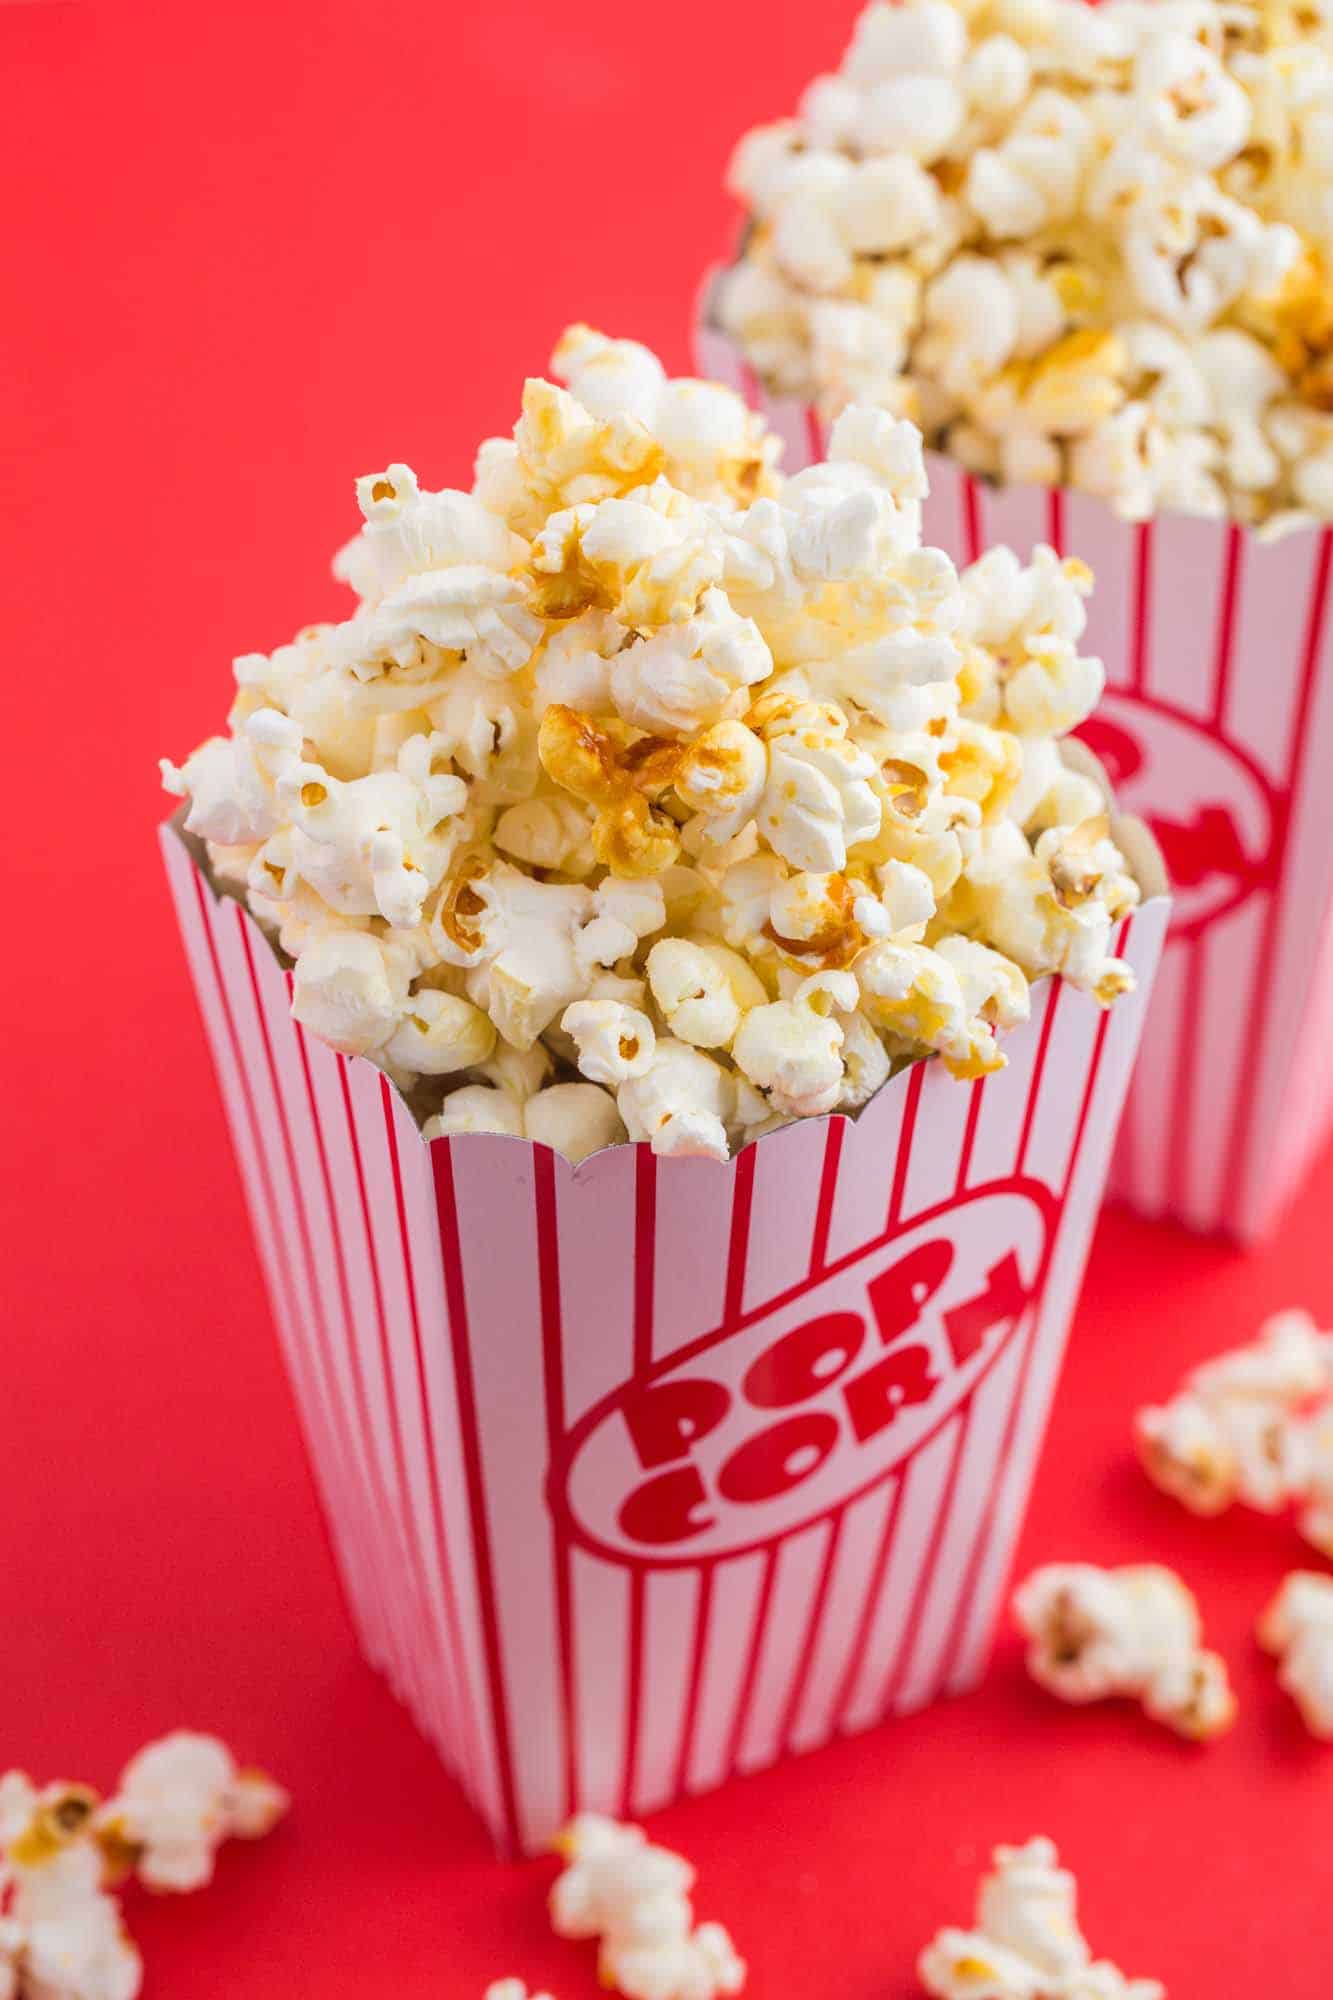 Kettle corn served in a paper popcorn cup